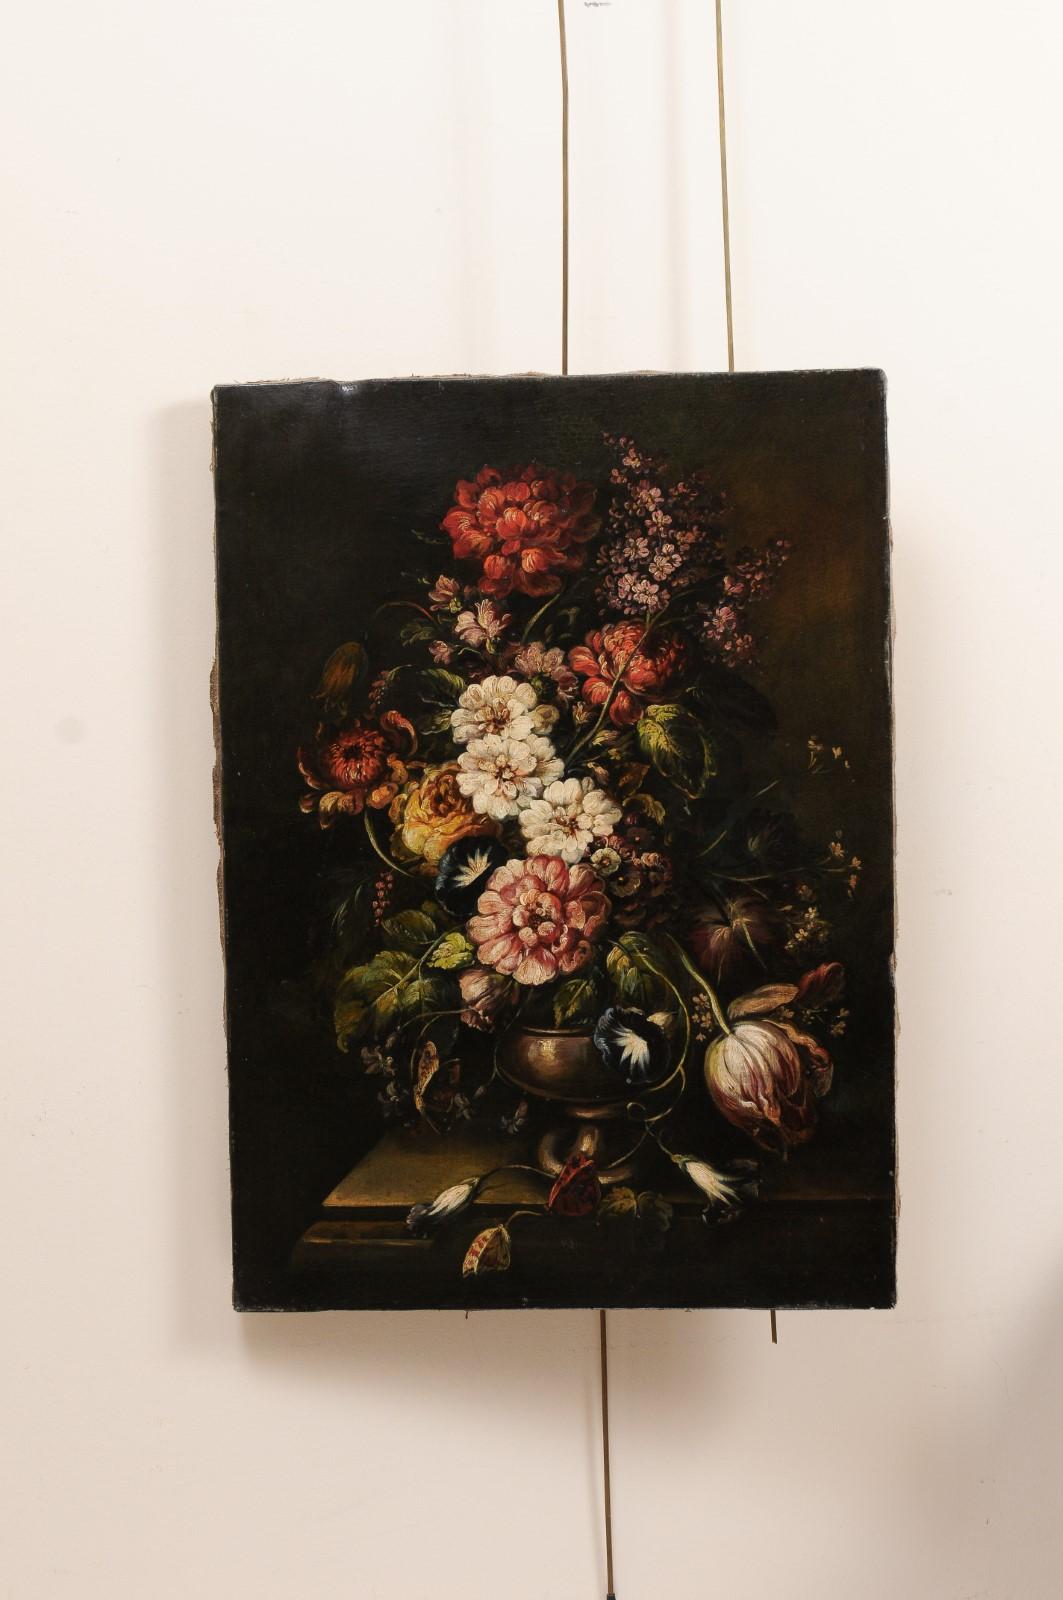 20th century oil on canvas still life painting with black ground and flower bouquet. Unframed.